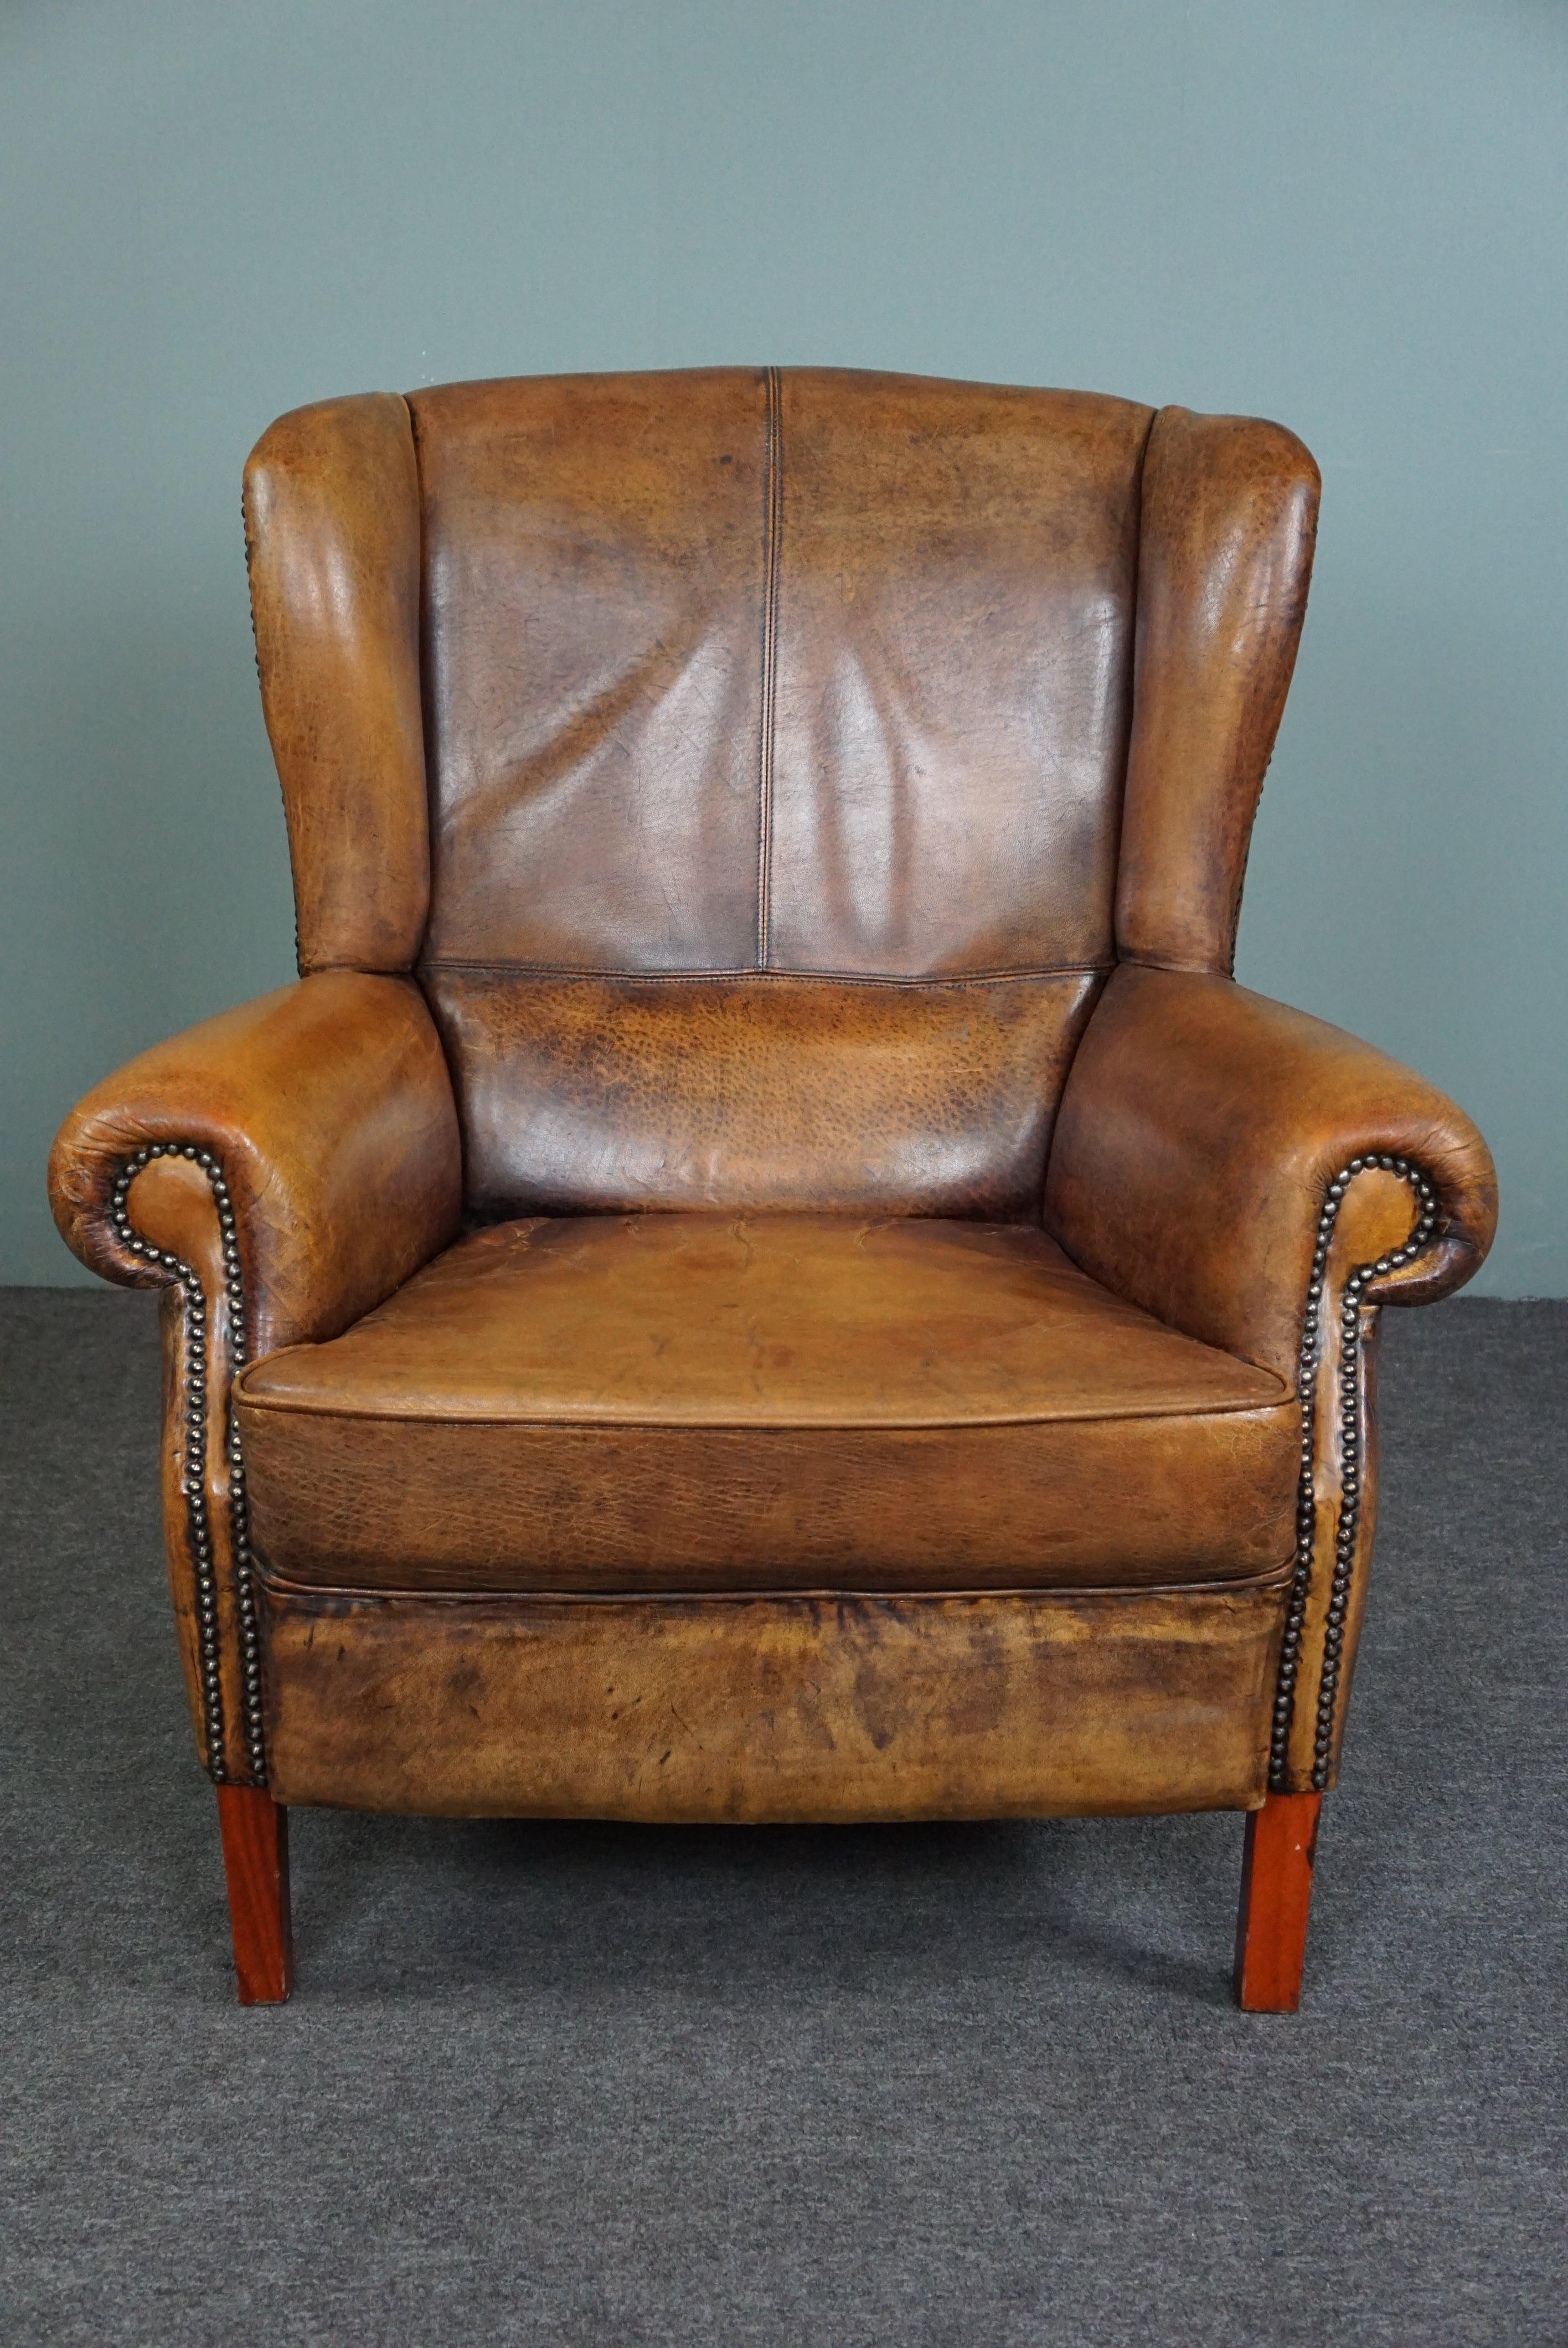 Offered is this beautiful worn sheepskin leather wing chair in a great color scheme!

This well-fitting wing chair with a lived-in appearance has beautiful colors and a beautiful division of the leather. Through use, this armchair has acquired a